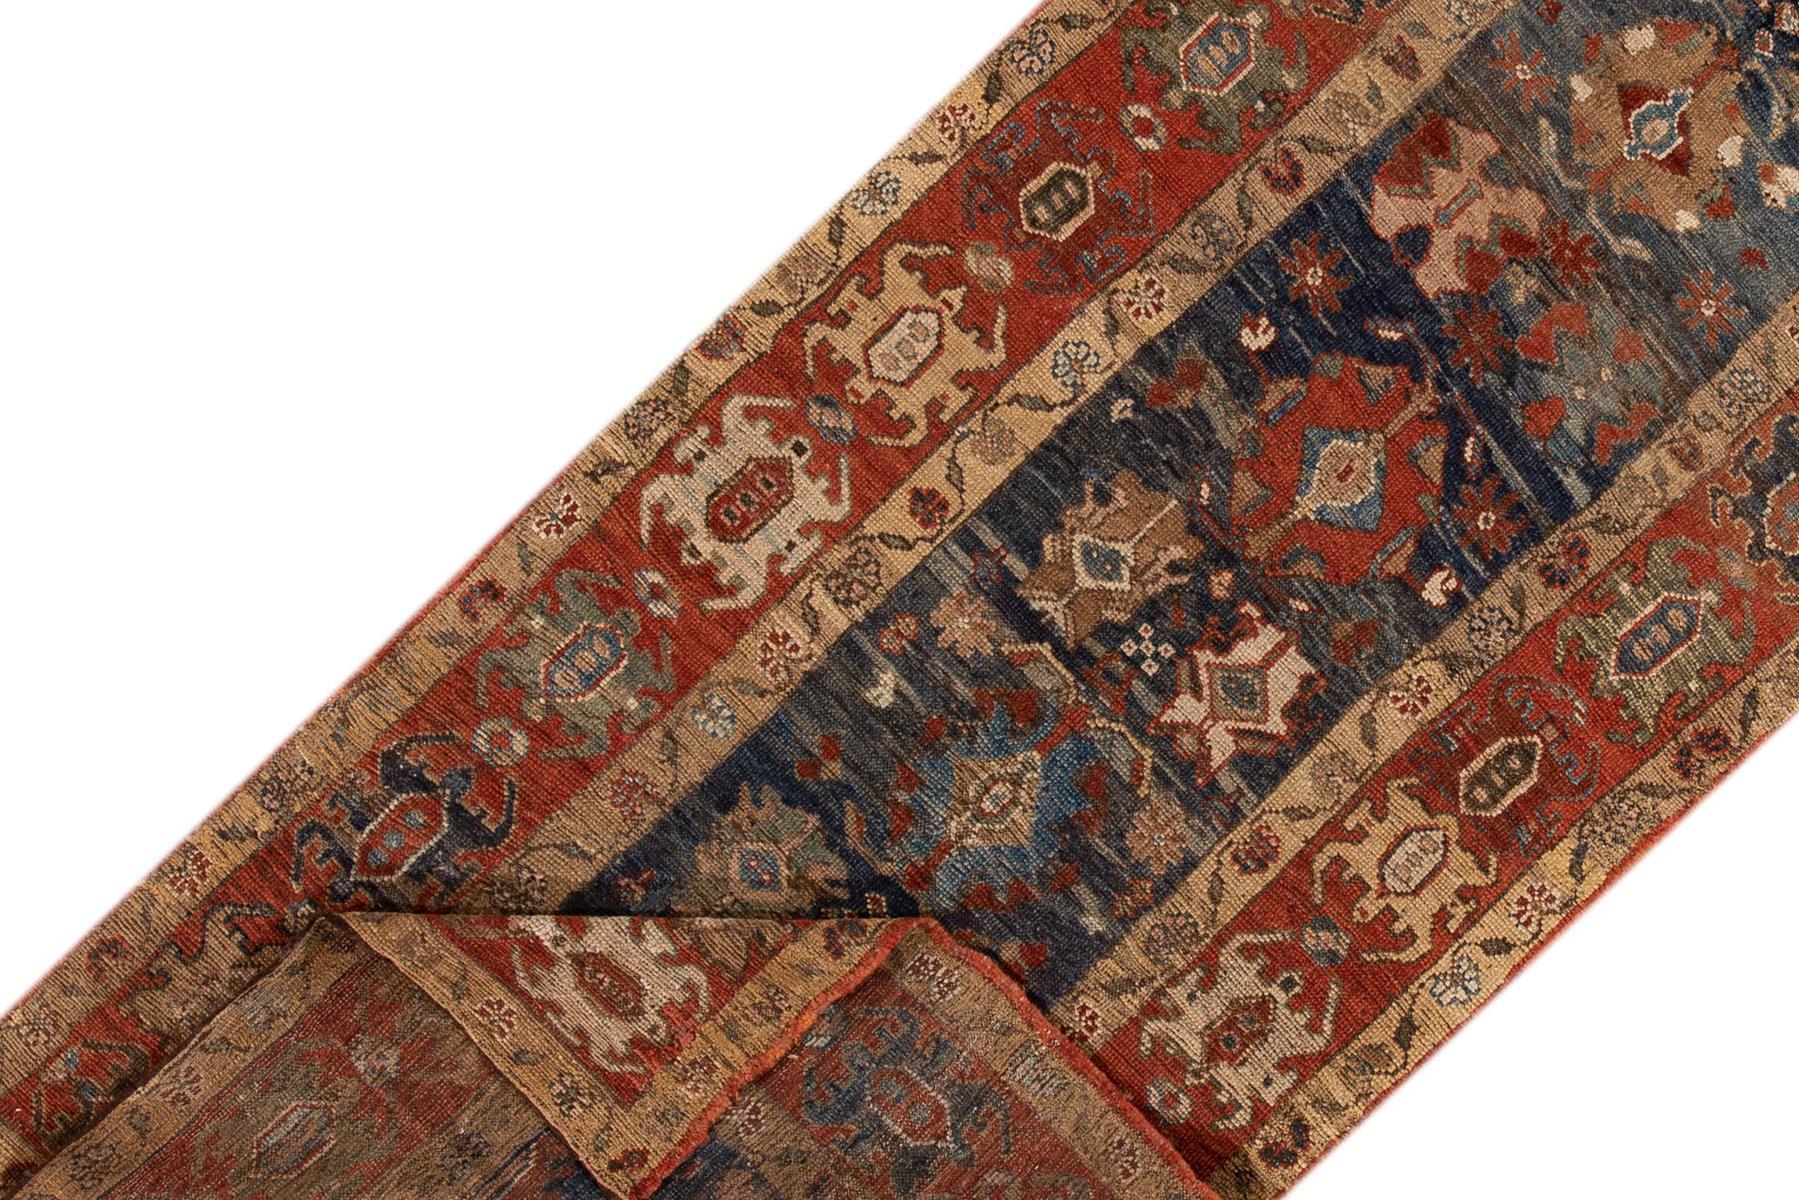 Vintage hand-knotted Persian Bakshaish Runner with a navy-blue field, the frame of rust, and beige accents in all-over tribal design. This piece has fine details, great colors, and a beautiful design.

This rug measures 3'11